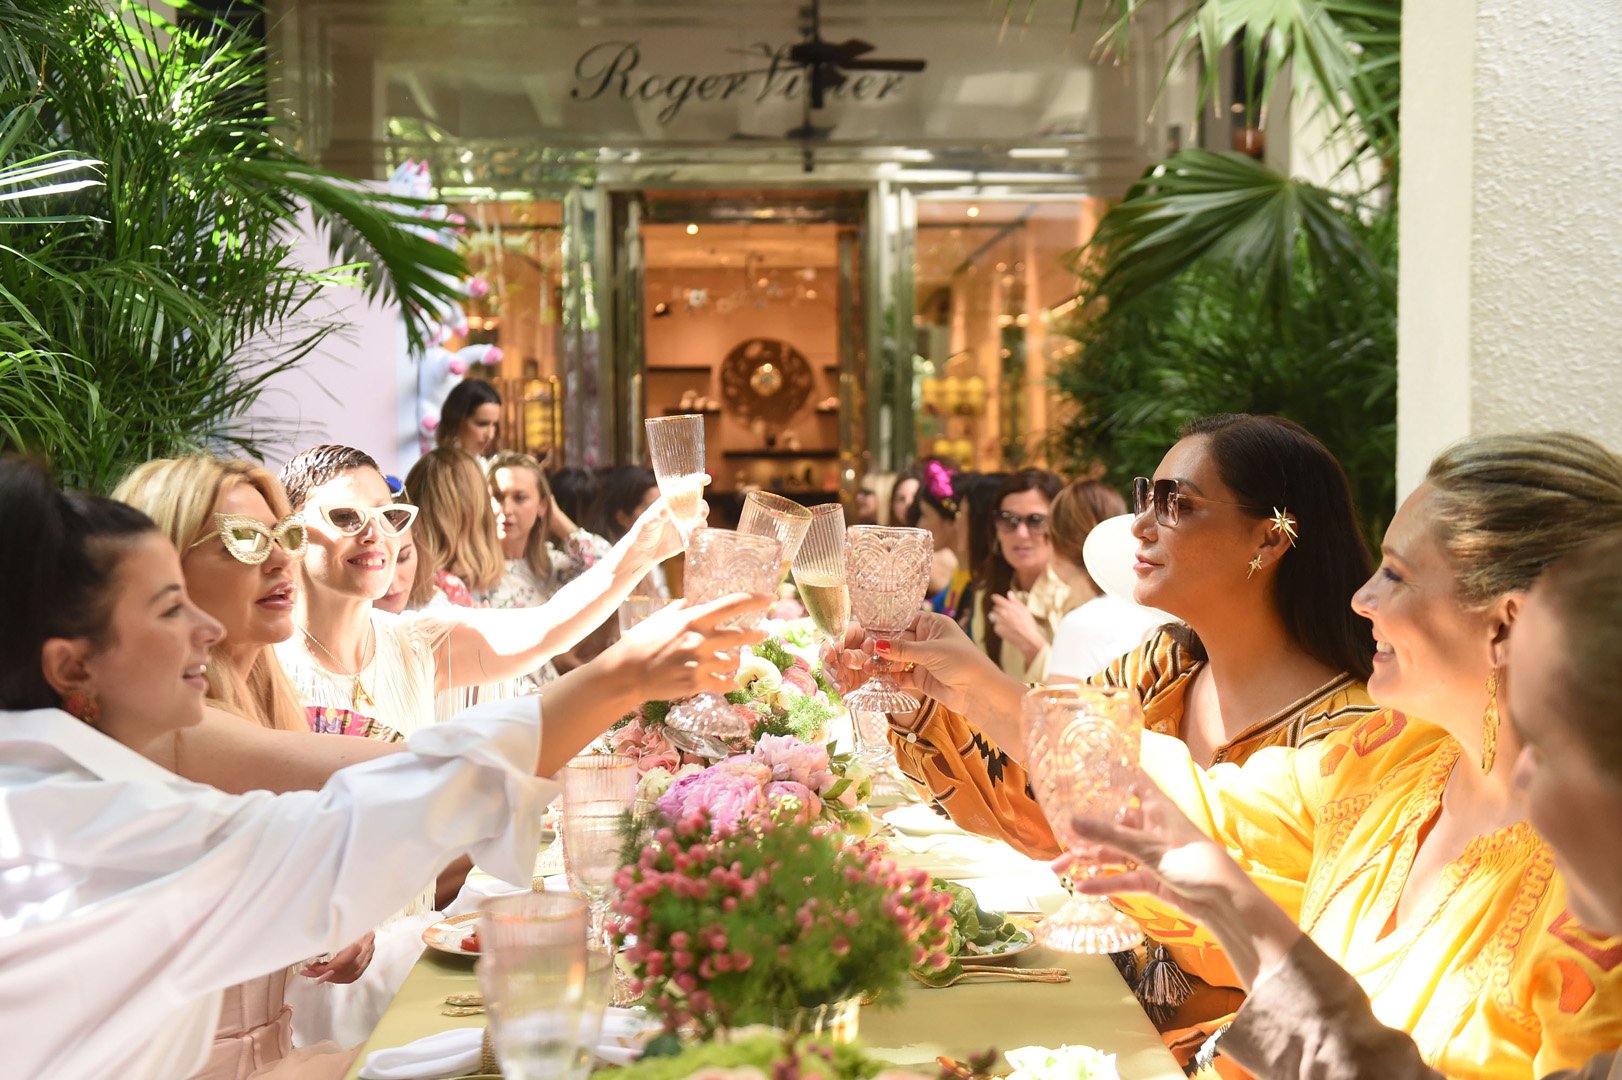 Roger Vivier Celebrates 10 Years at Bal Harbour Shops with the launch of the Fall issue of Bal Harbour Magazine with a luncheon in front of the boutique